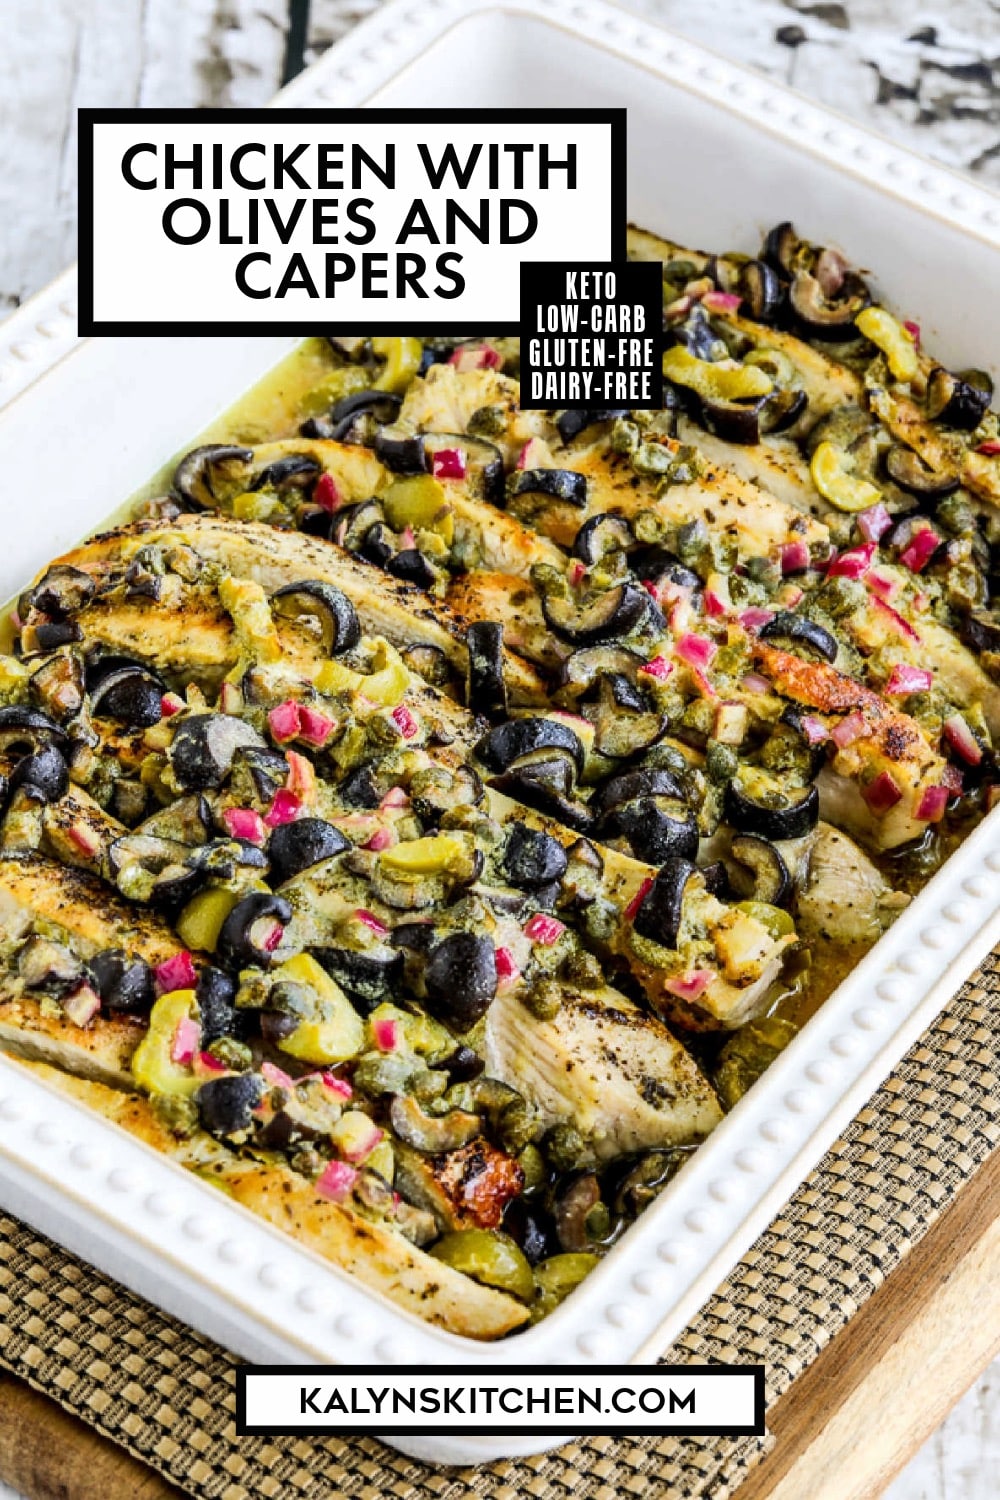 Pinterest image of Chicken with Olives and Capers